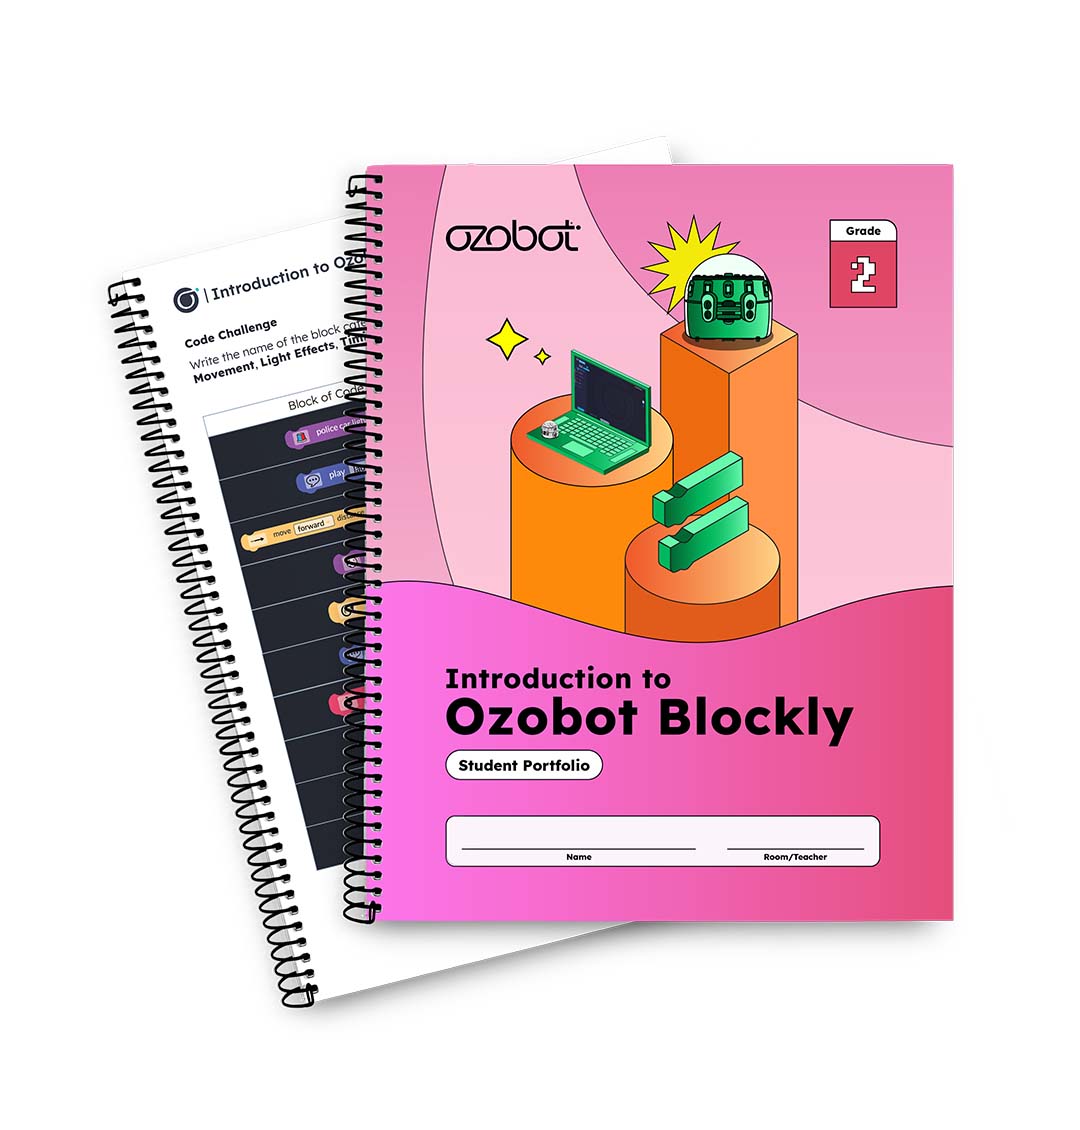 Introduction to ozobot blockly beginner student workbook - easy coding activities for second grade students